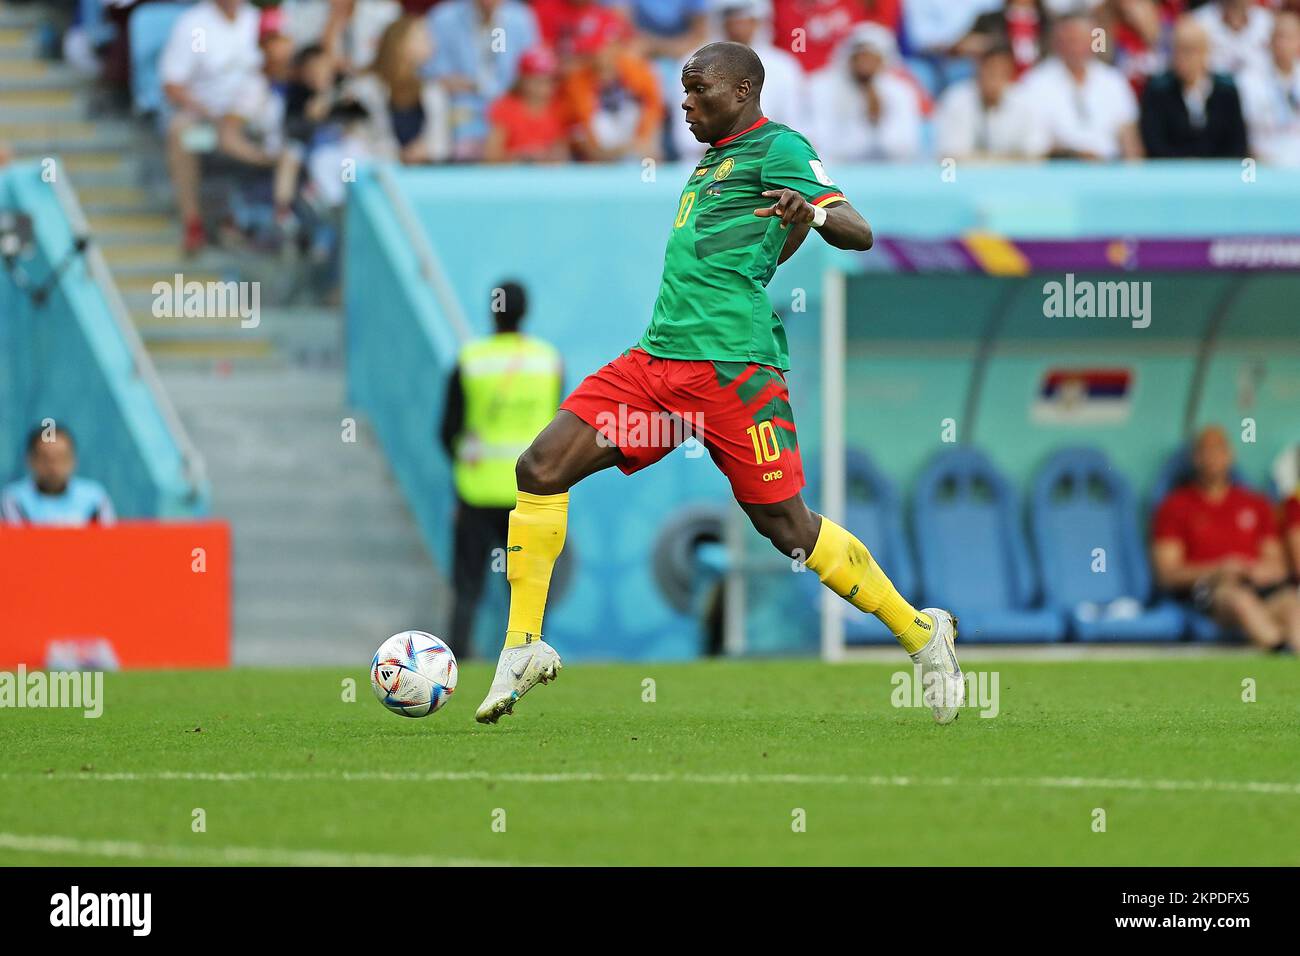 Doha, Qatar. 28th Nov, 2022. Vincent Aboubakar of Cameroon, during the match between Cameroon and Serbia, for the 2nd round of Group G of the FIFA World Cup Qatar 2022, Al Janoub Stadium this Monday, 28. 30761 (Heuler Andrey/SPP) Credit: SPP Sport Press Photo. /Alamy Live News Stock Photo